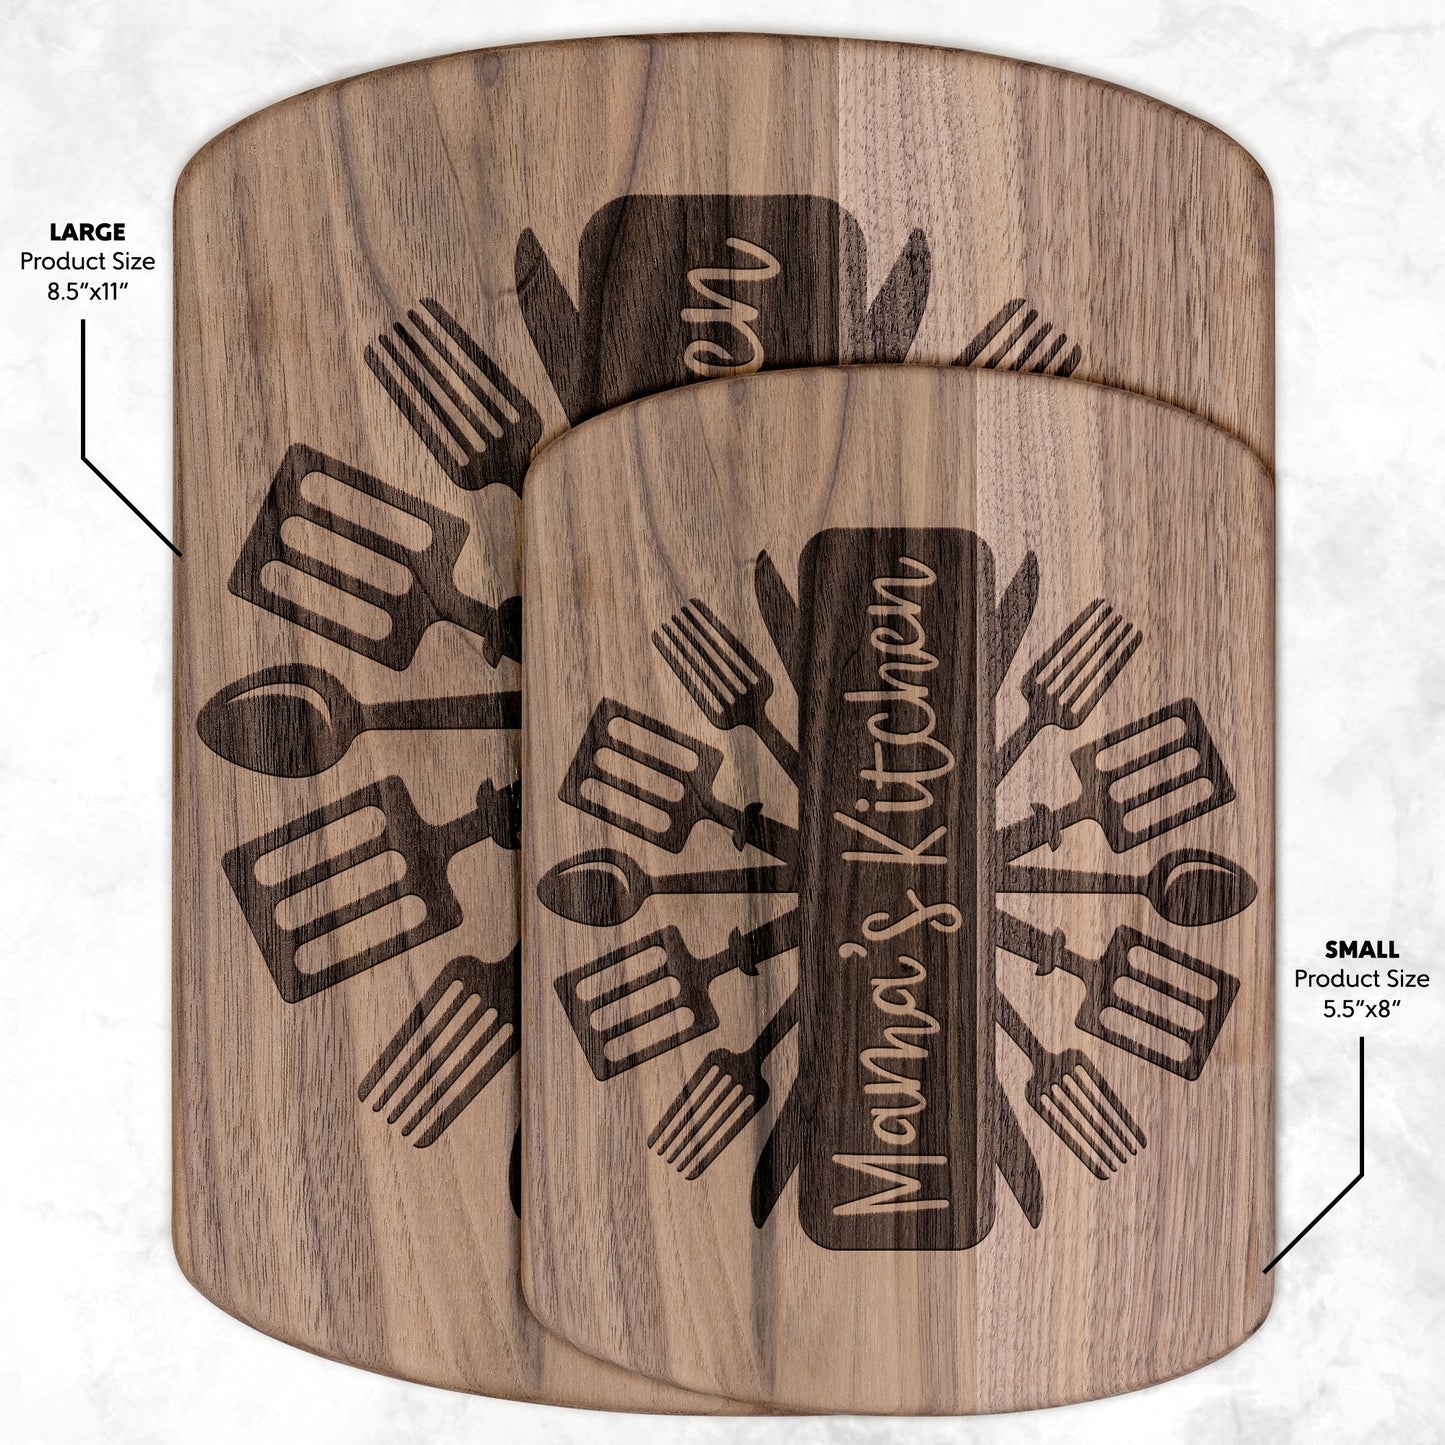 Personalized Mama's Kitchen - Hardwood Oval Cutting Board - Get Deerty